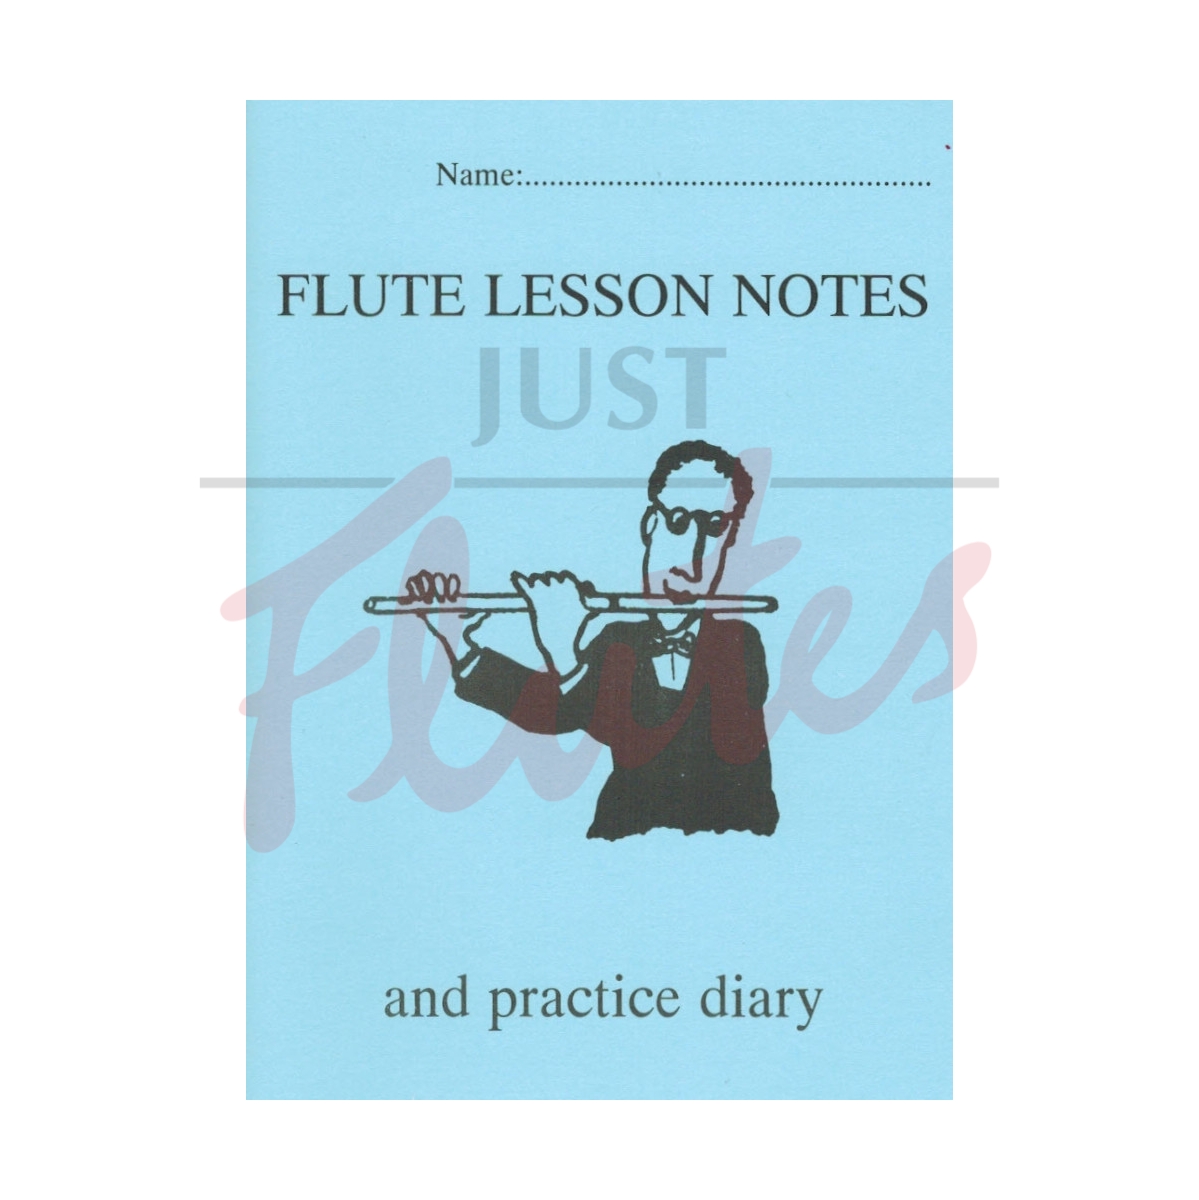 Flute Lesson Note and Practice Diary